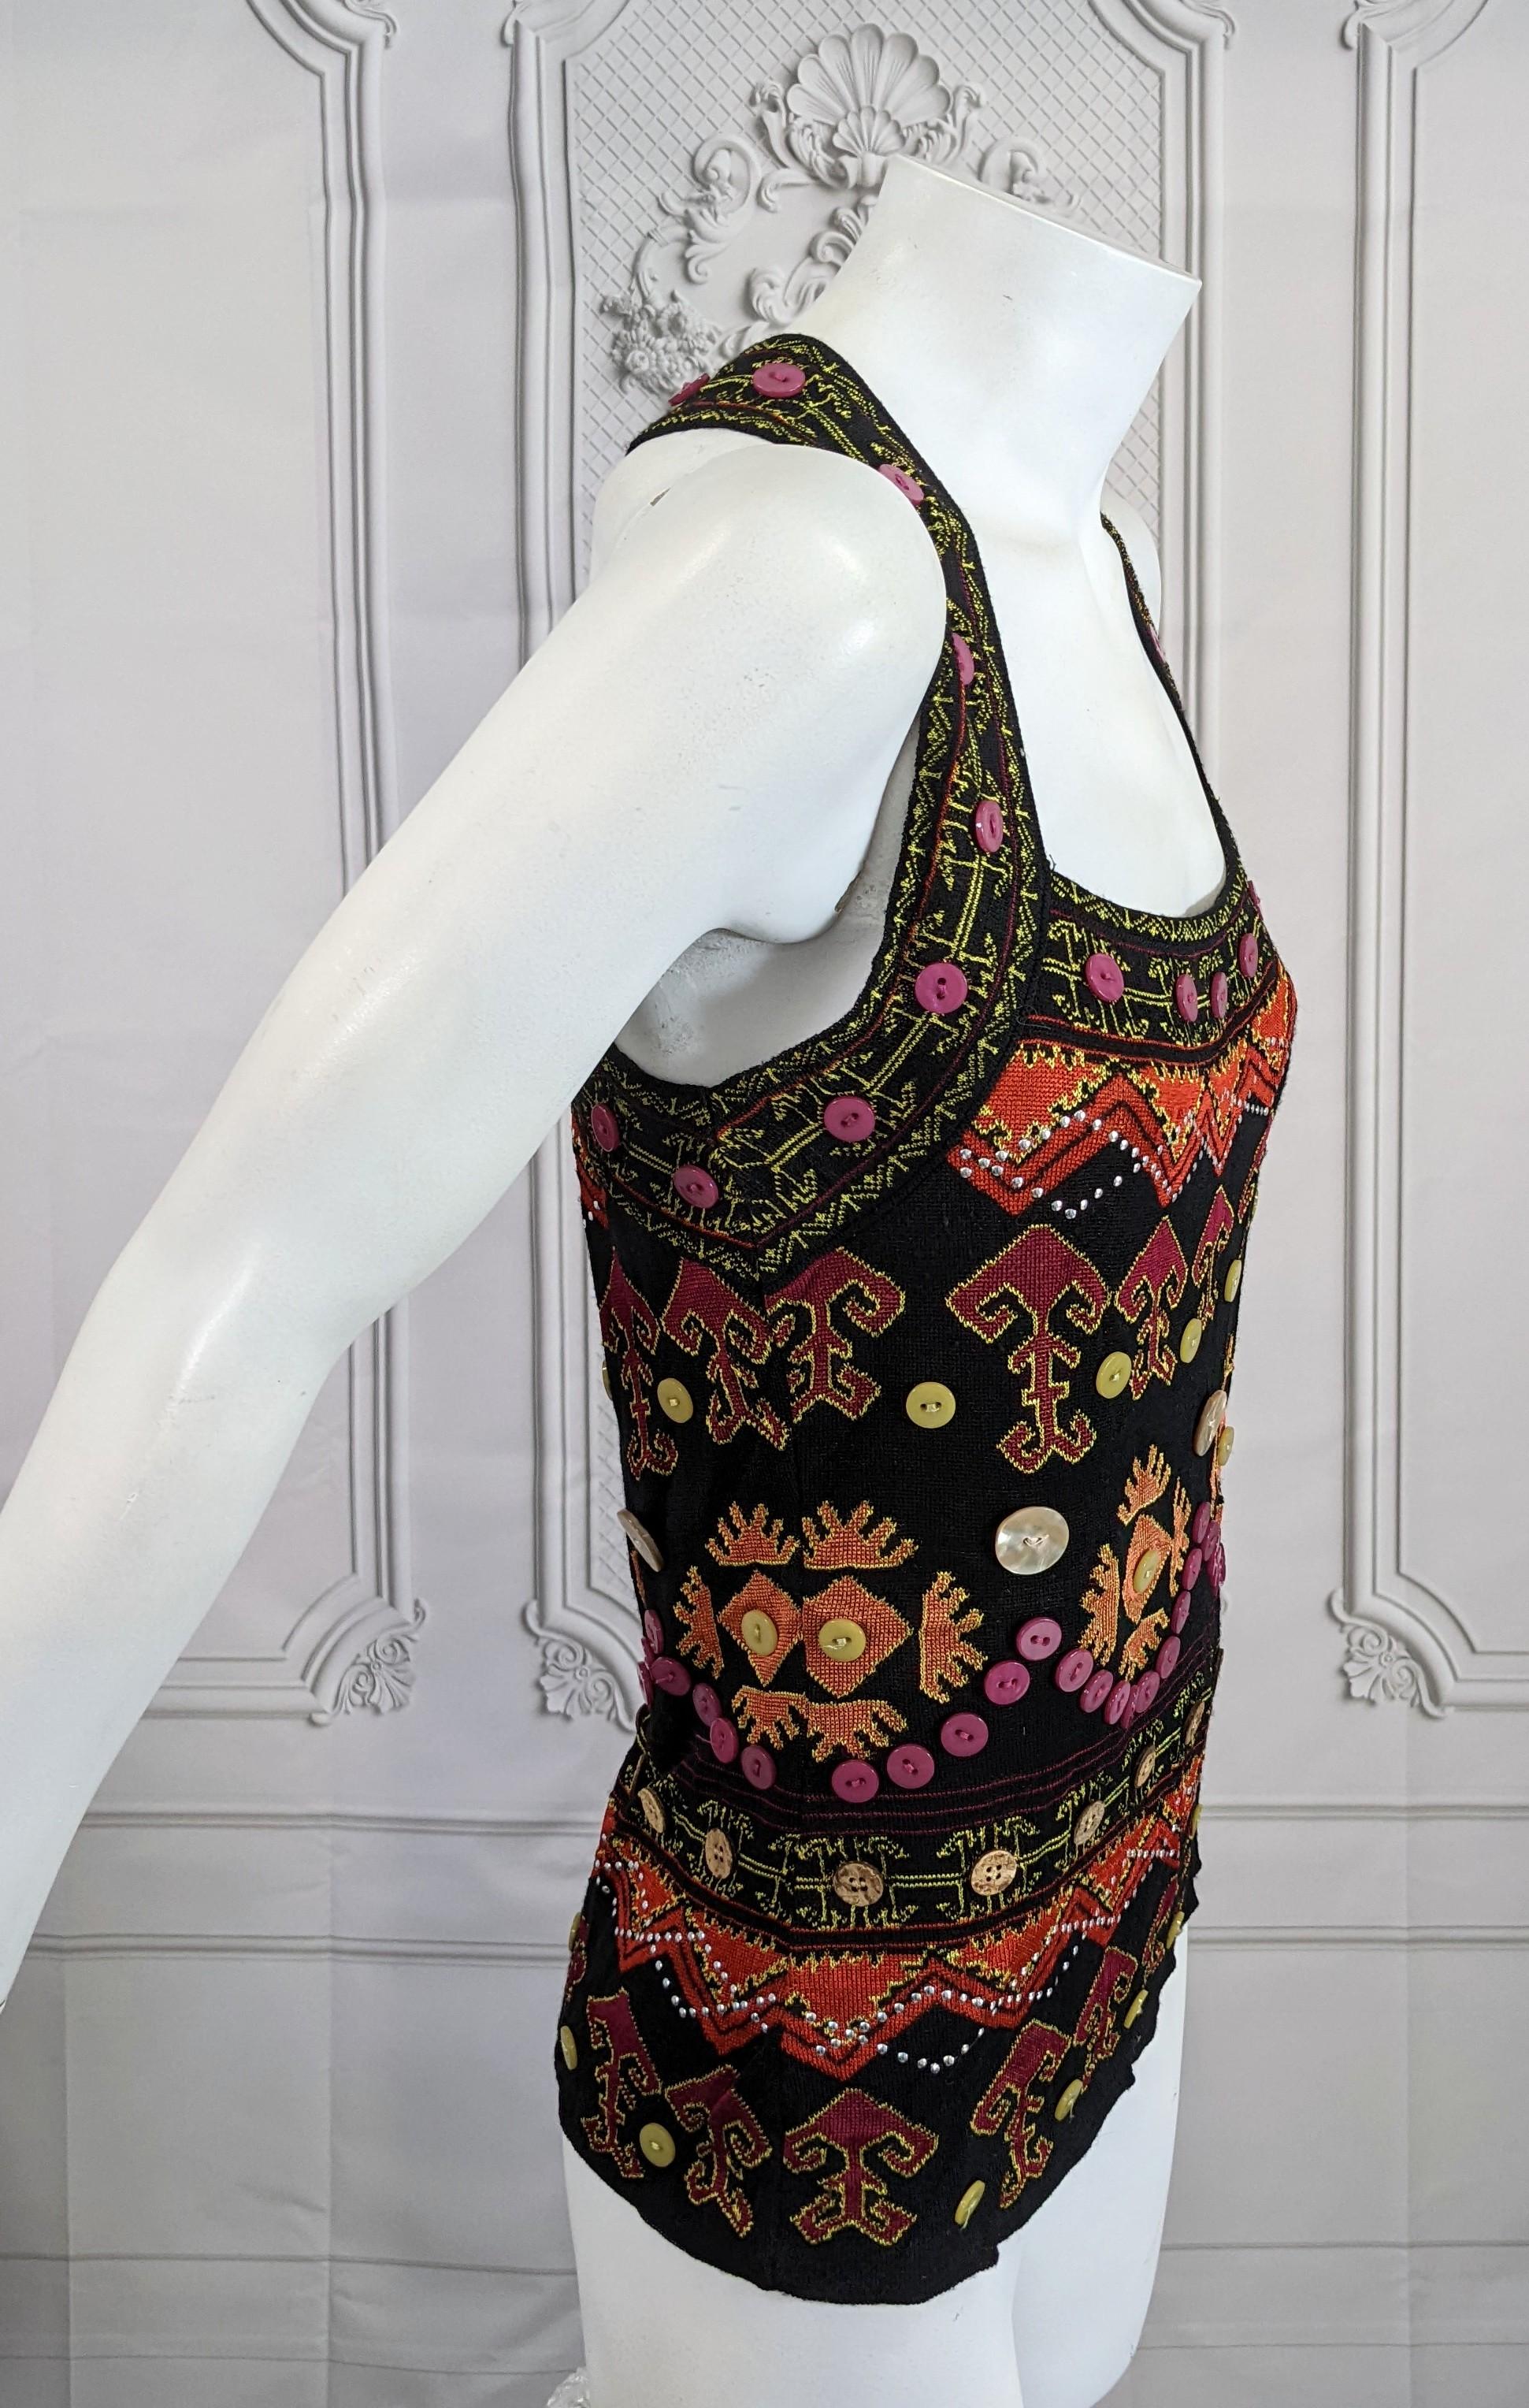 Christian Dior by Galliano Fall-Winter 2002 Ethnic Motif Knit Top In Excellent Condition For Sale In New York, NY